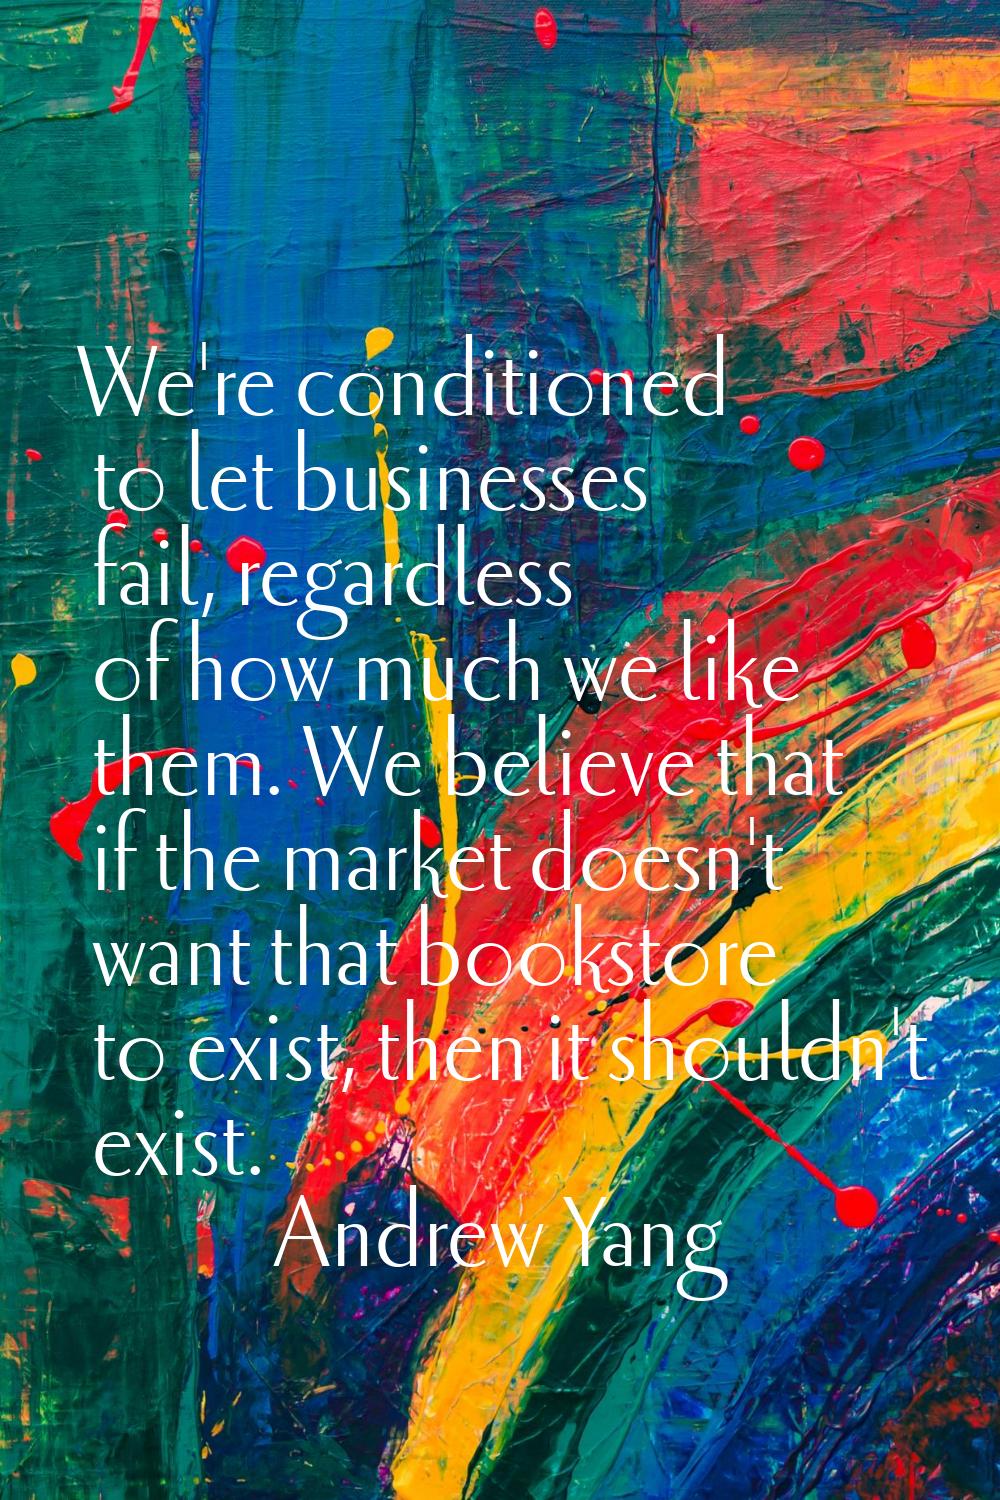 We're conditioned to let businesses fail, regardless of how much we like them. We believe that if t